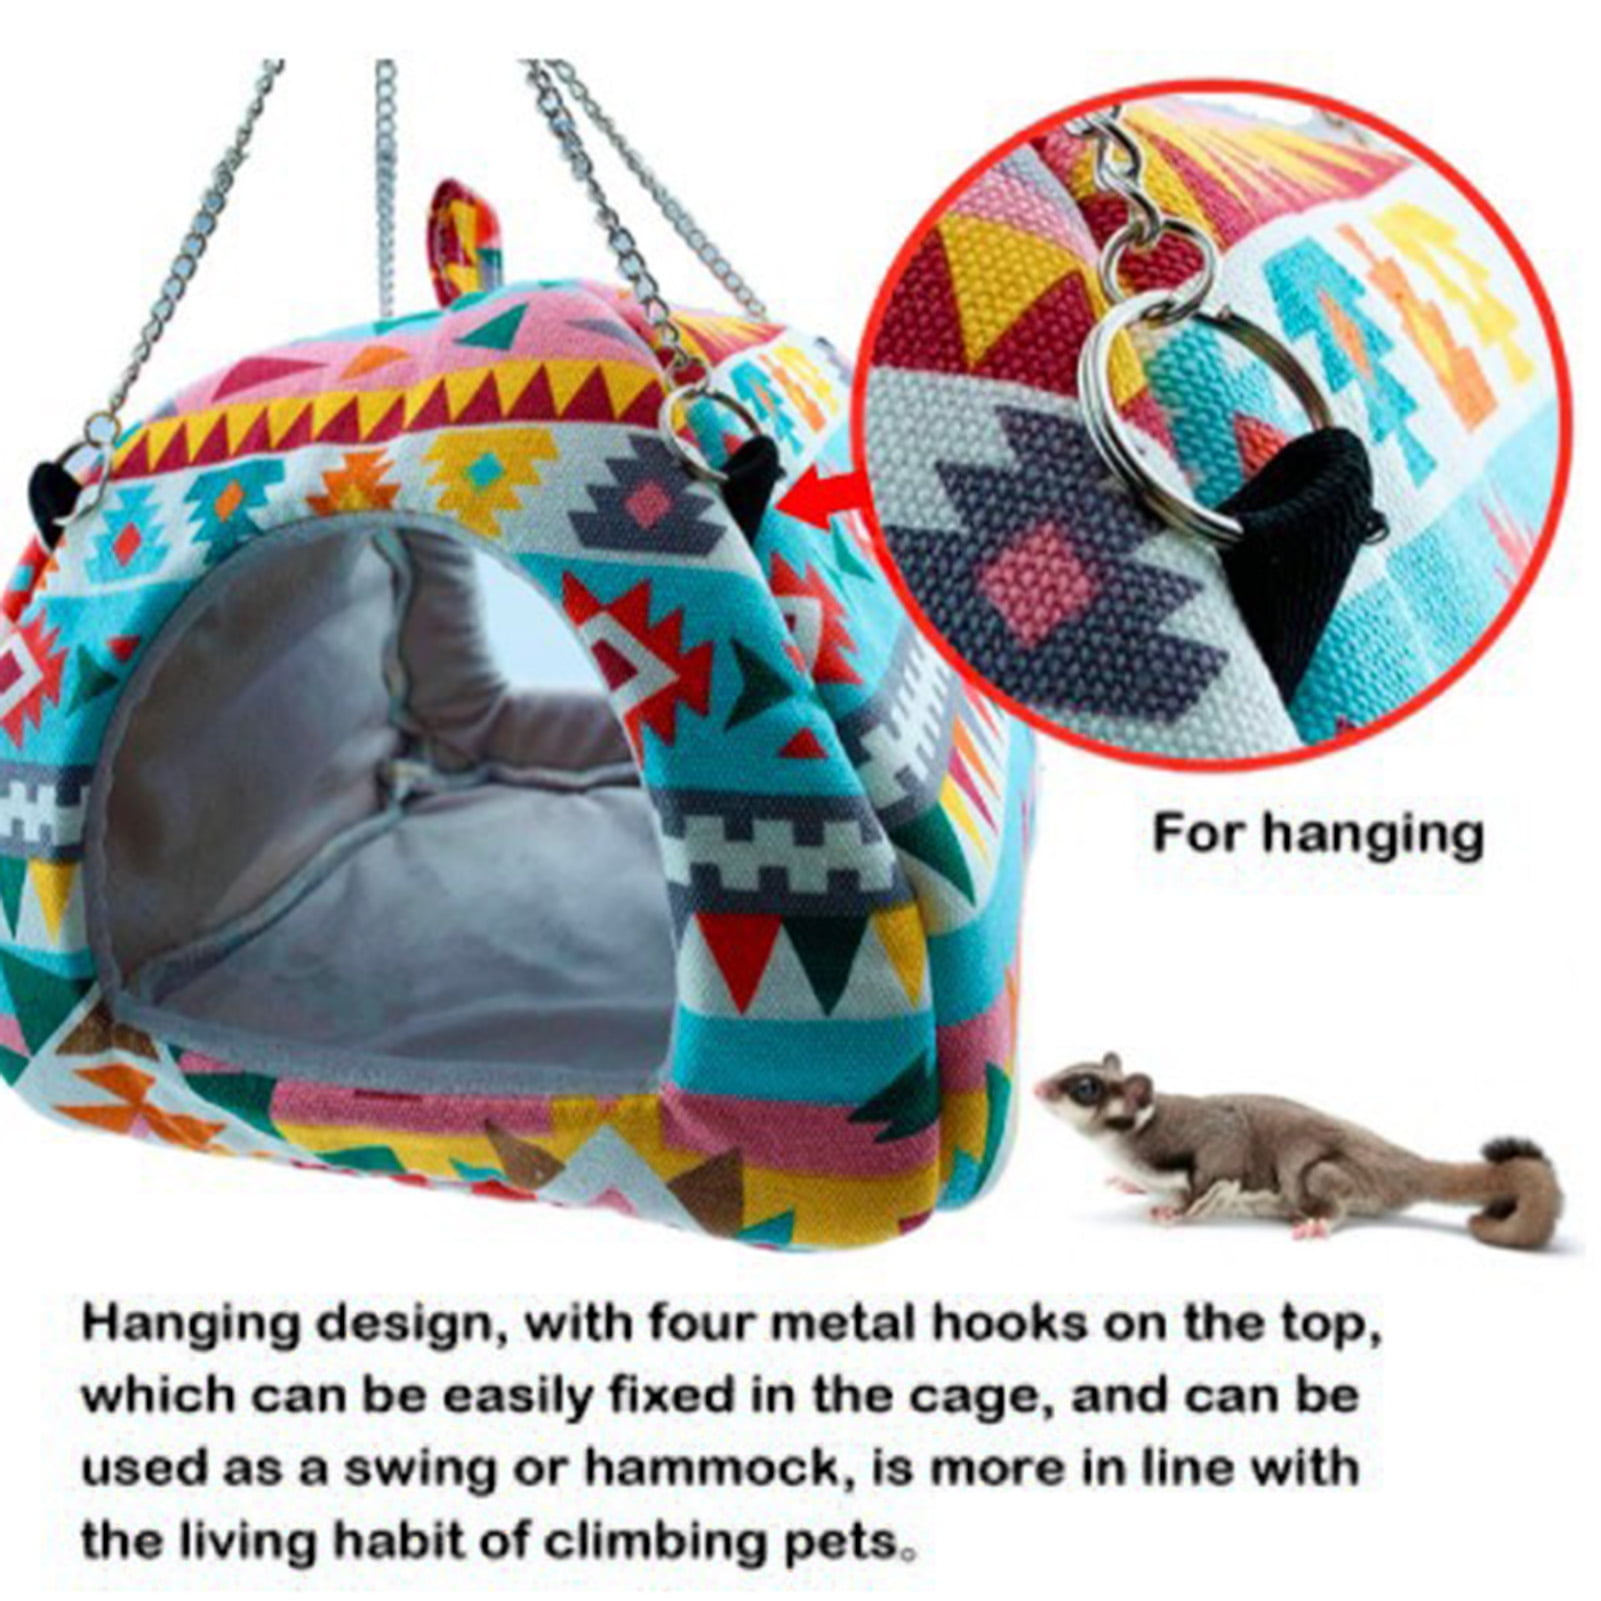 Ethnic style + mat, extra large 8.66 inch Guinea Pig Hamster Bird Squirrel Ferret Suger Glider Hedgehog Chinchillas Bed Hammock Winter Warm Small Pet Animal Hanging Home House Cotton Cage Nest Tent 